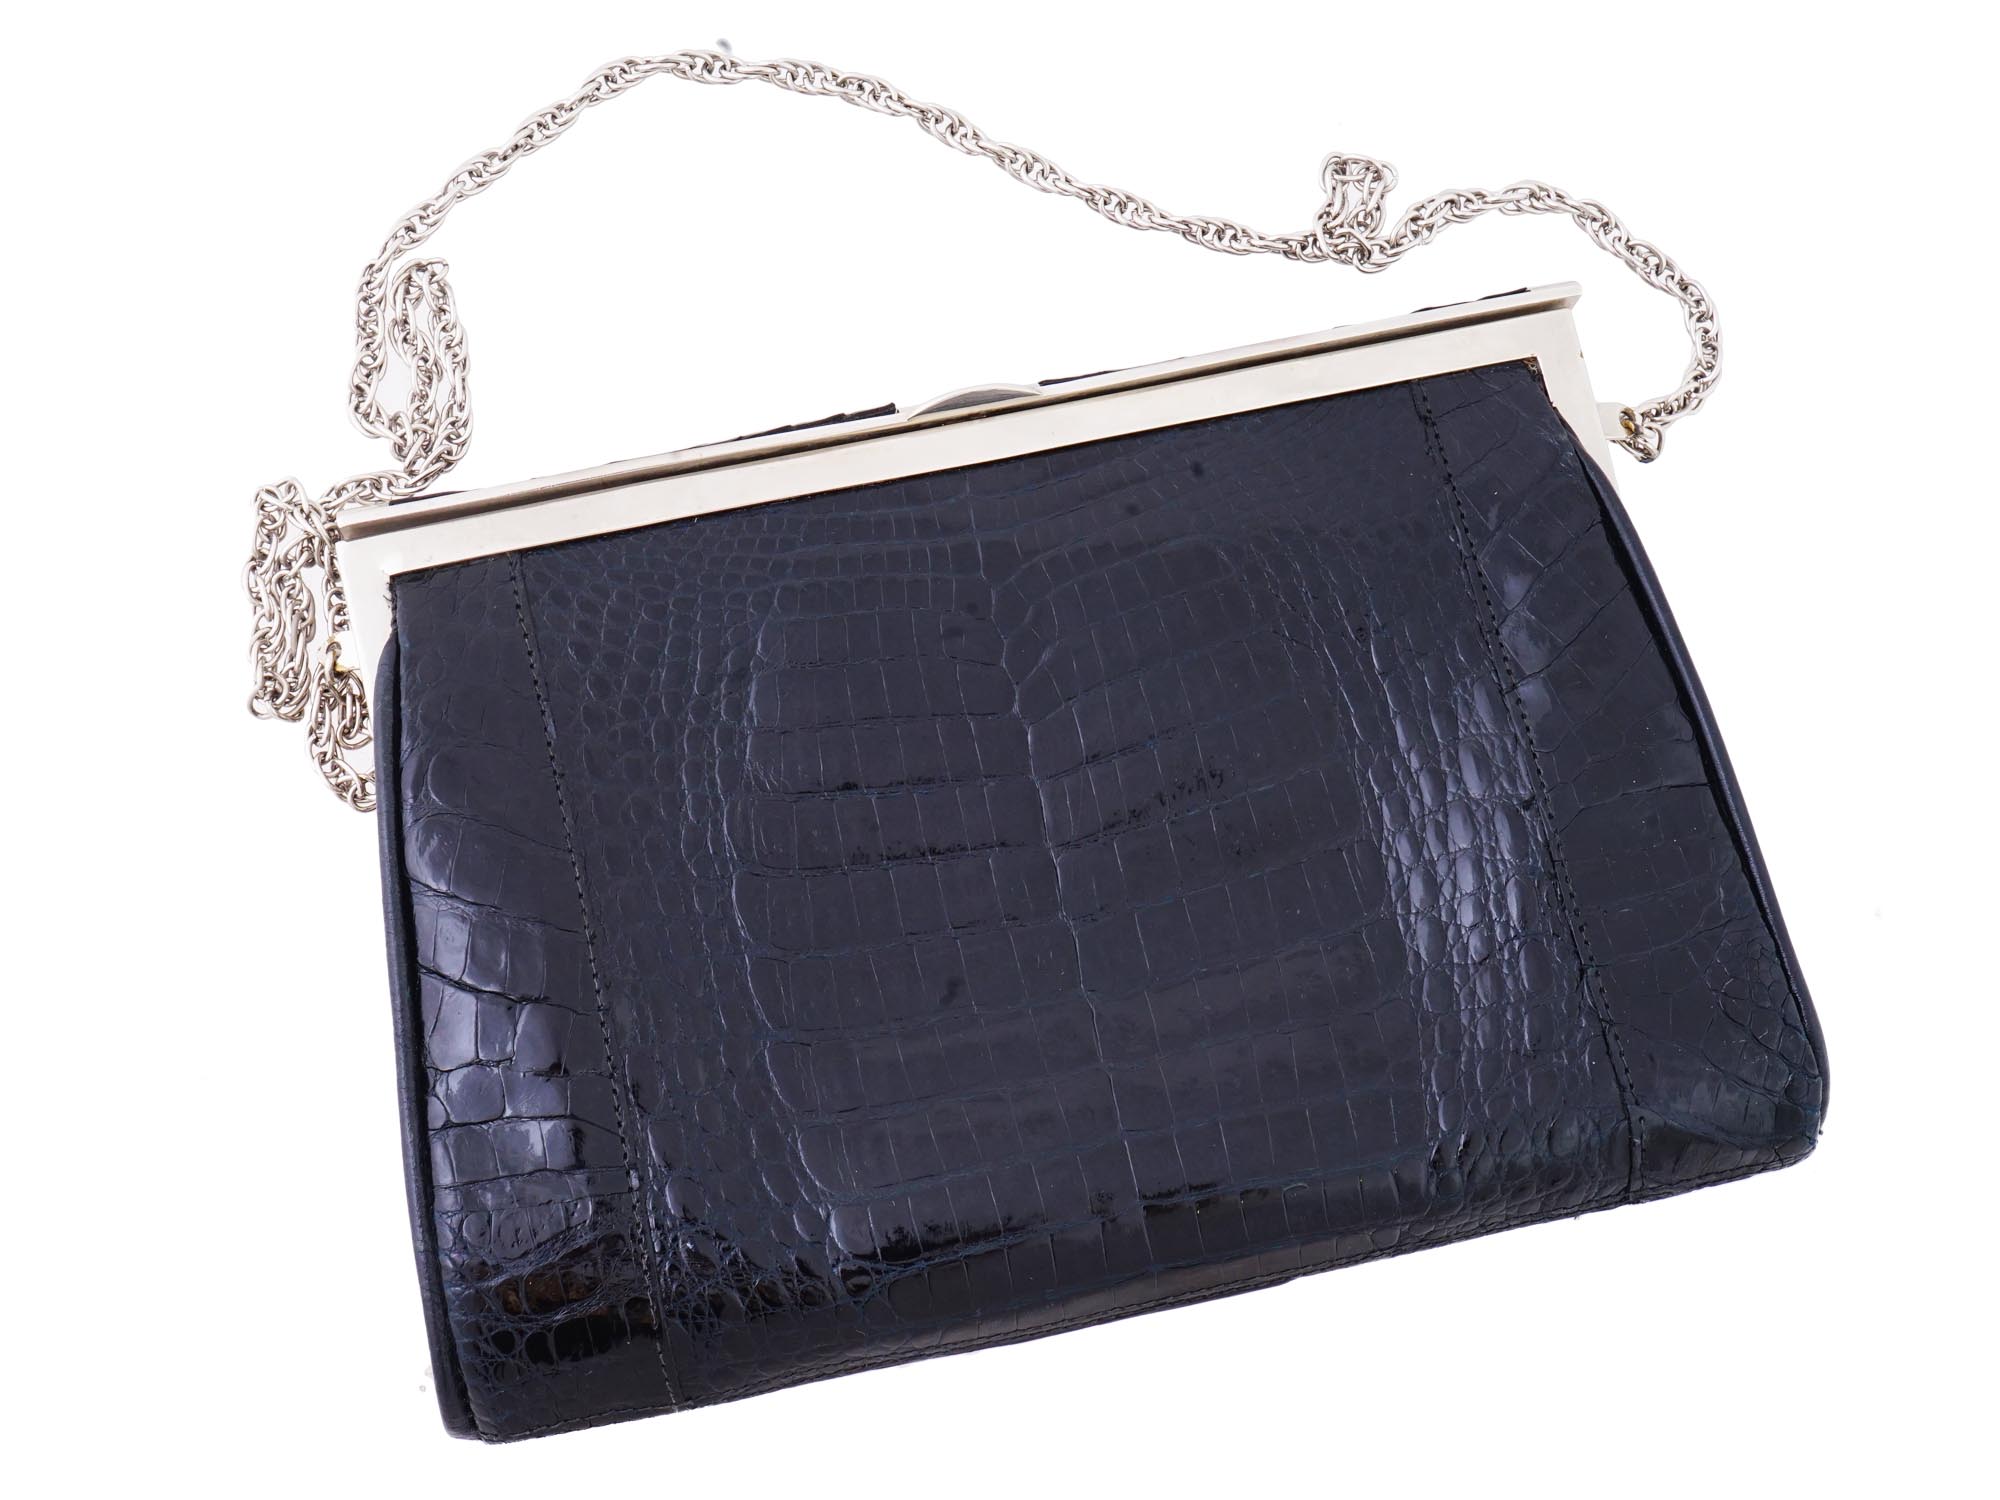 VINTAGE CROCODILE LEATHER CLUTCH BAG ON CHAIN STRAP PIC-0